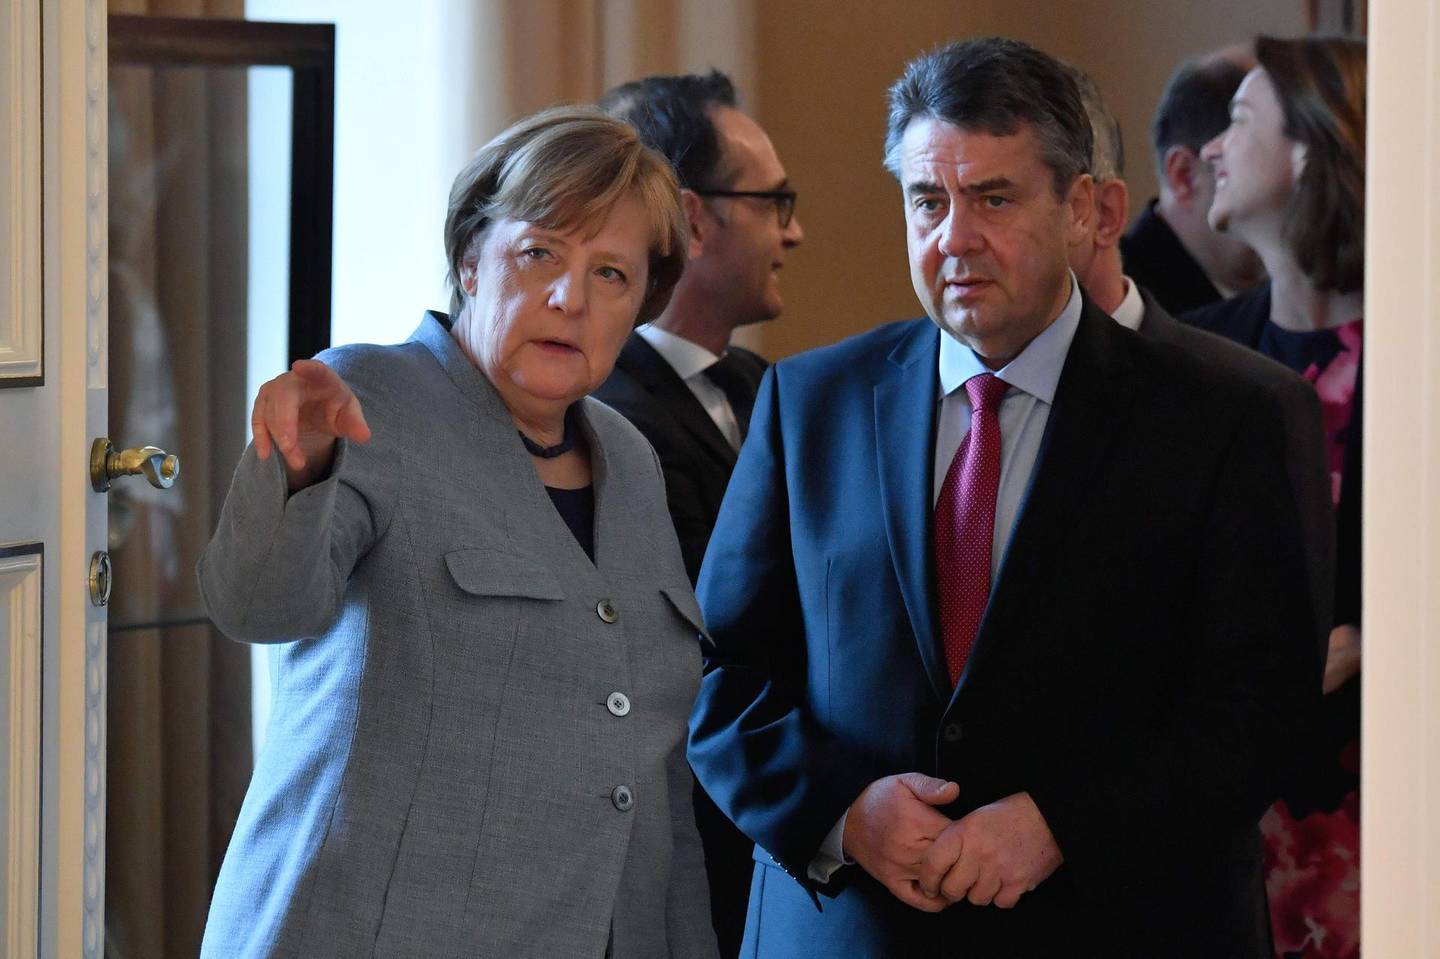 German Vice Chancellor and Foreign Minister Sigmar Gabriel (R) and German Chancellor Angela Merkel talk as they wait to be introduced to the German President during a New Year's reception at the presidential Bellevue Palace in Berlin on January 9, 2018. / AFP PHOTO / John MACDOUGALL